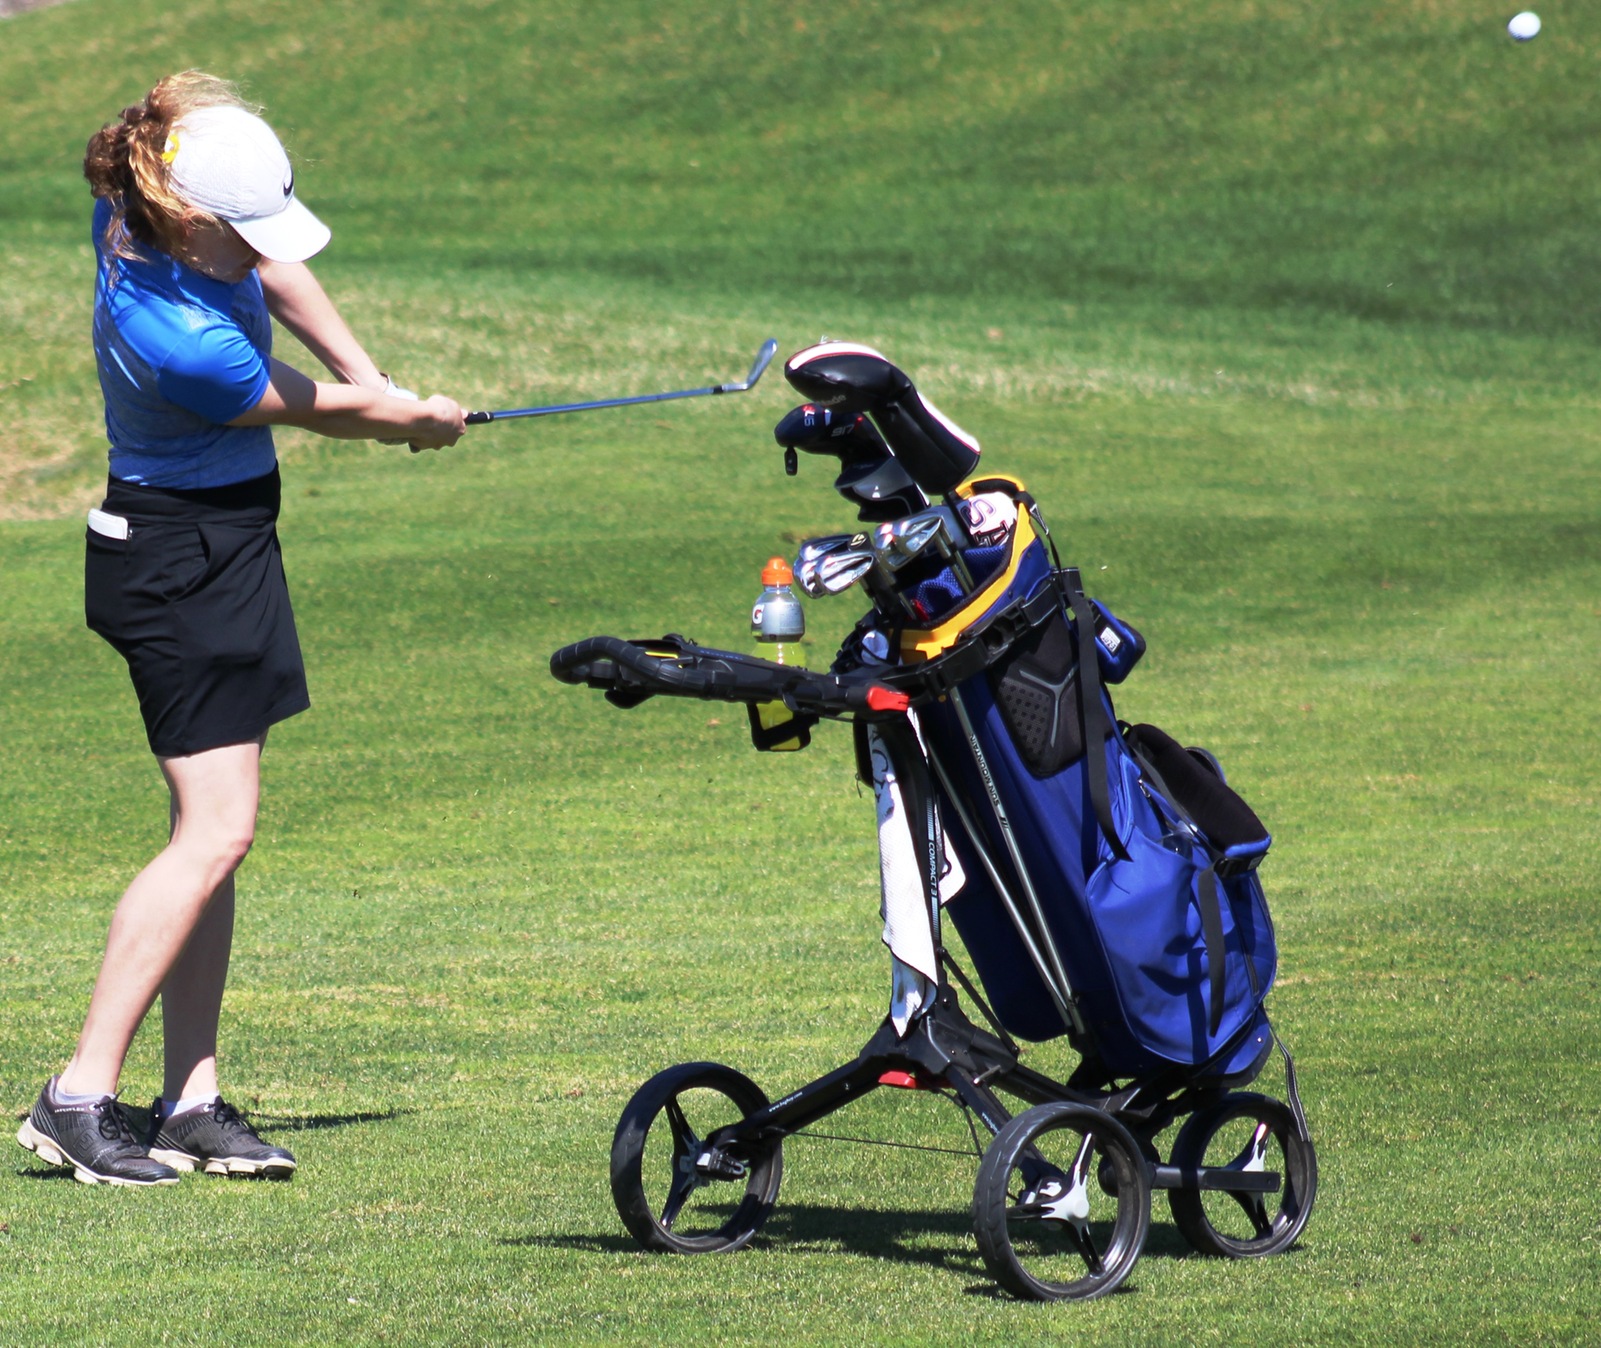 NIACC's Morgan Luecht hits approach shot toward the green during Saturday's regional golf tournament in Ankeny.